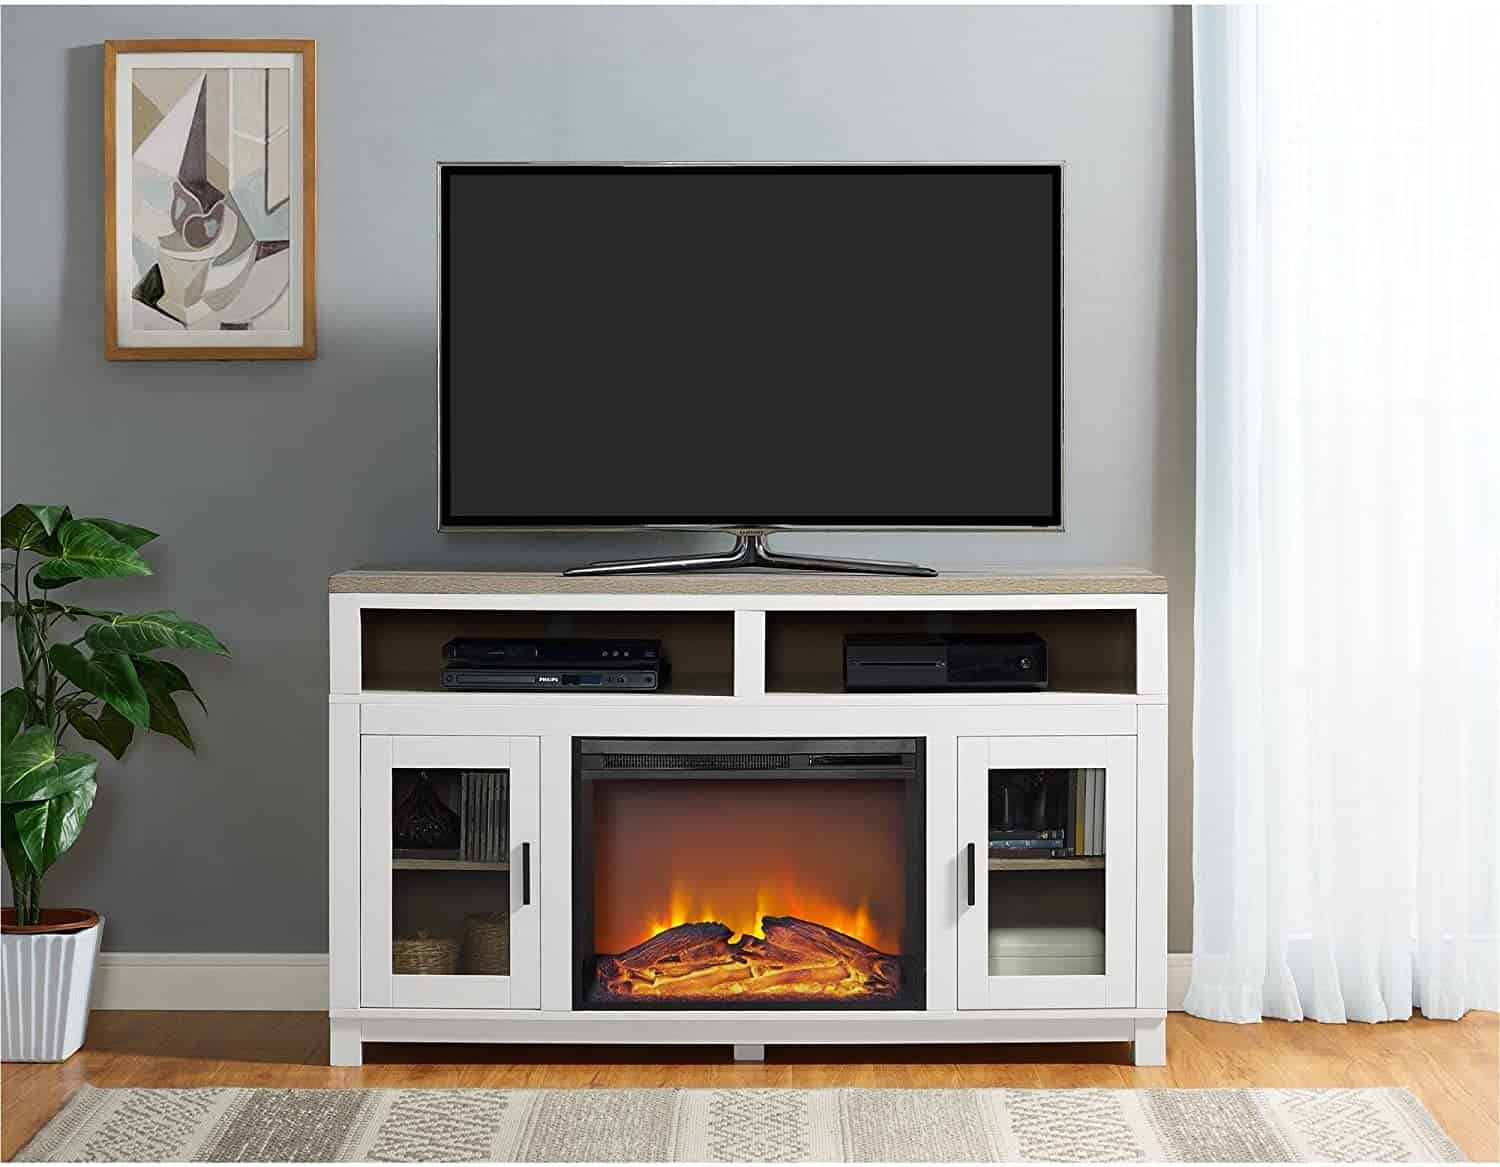 Electric Fireplace TV stand